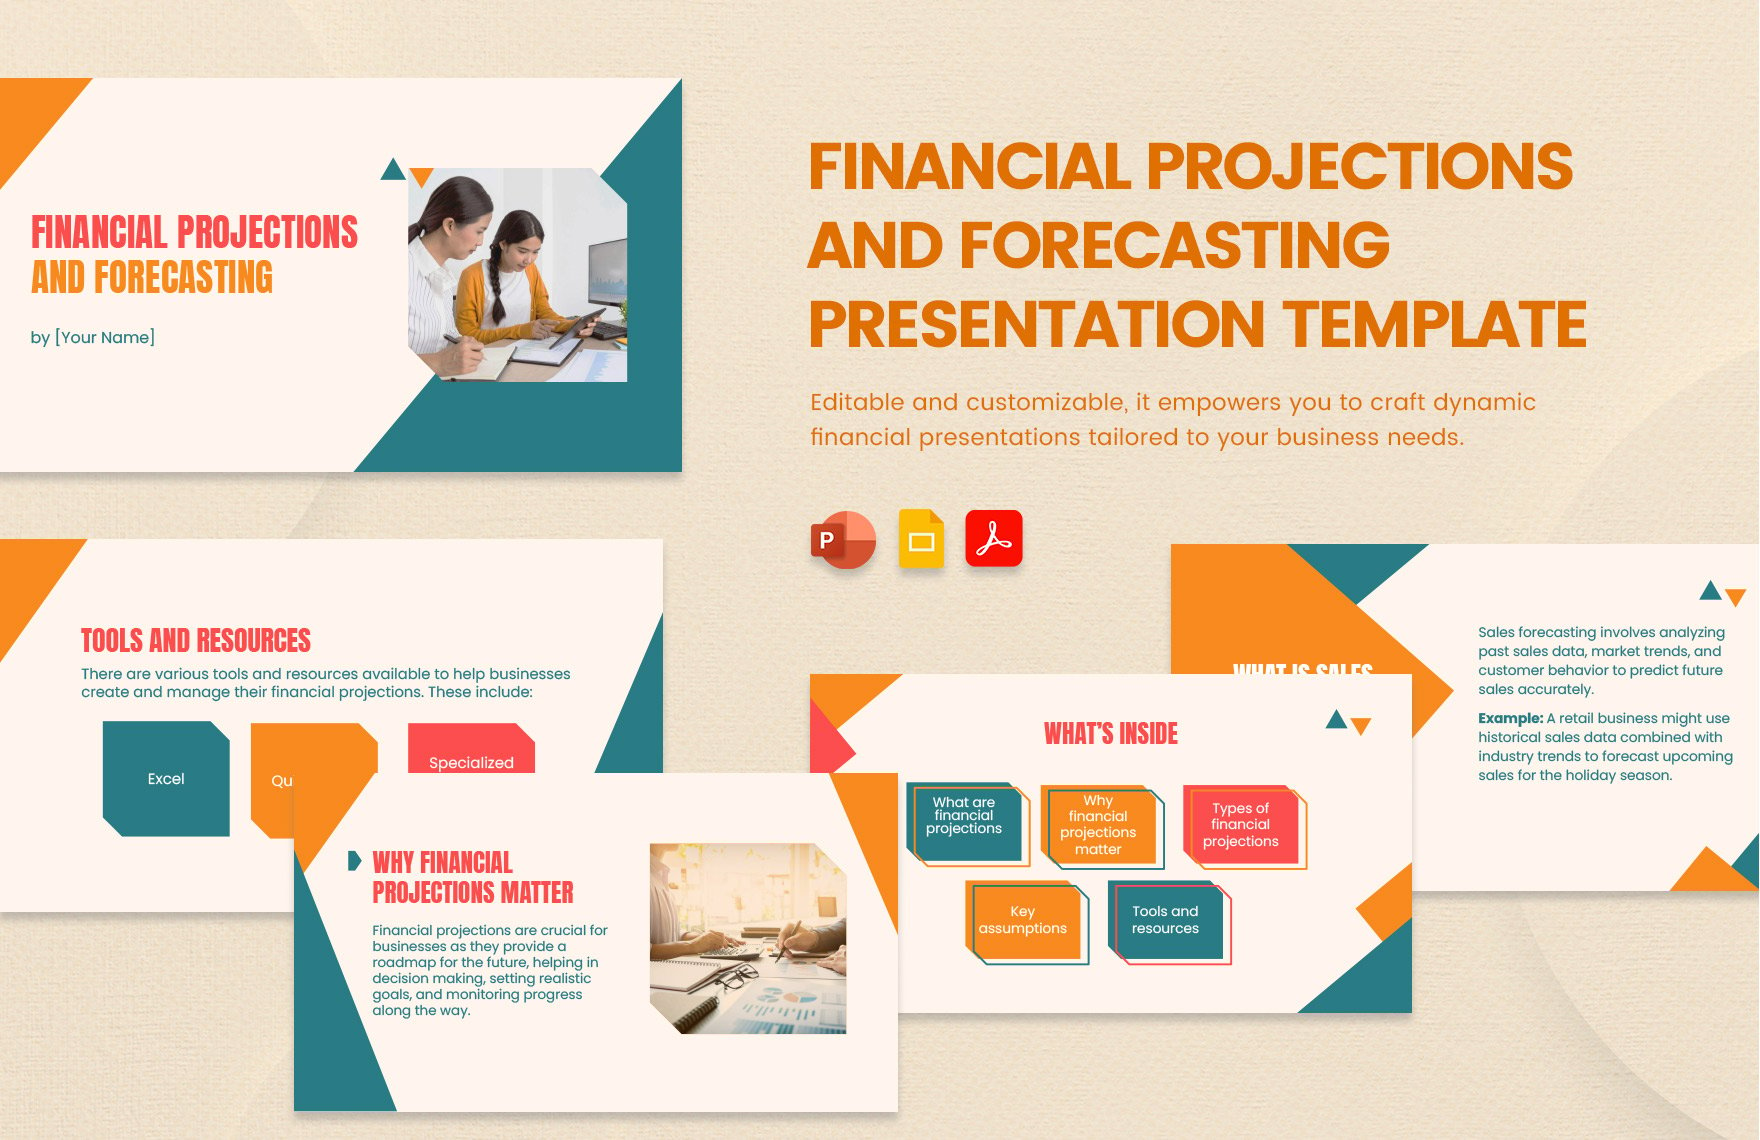 Financial Projections and Forecasting Presentation